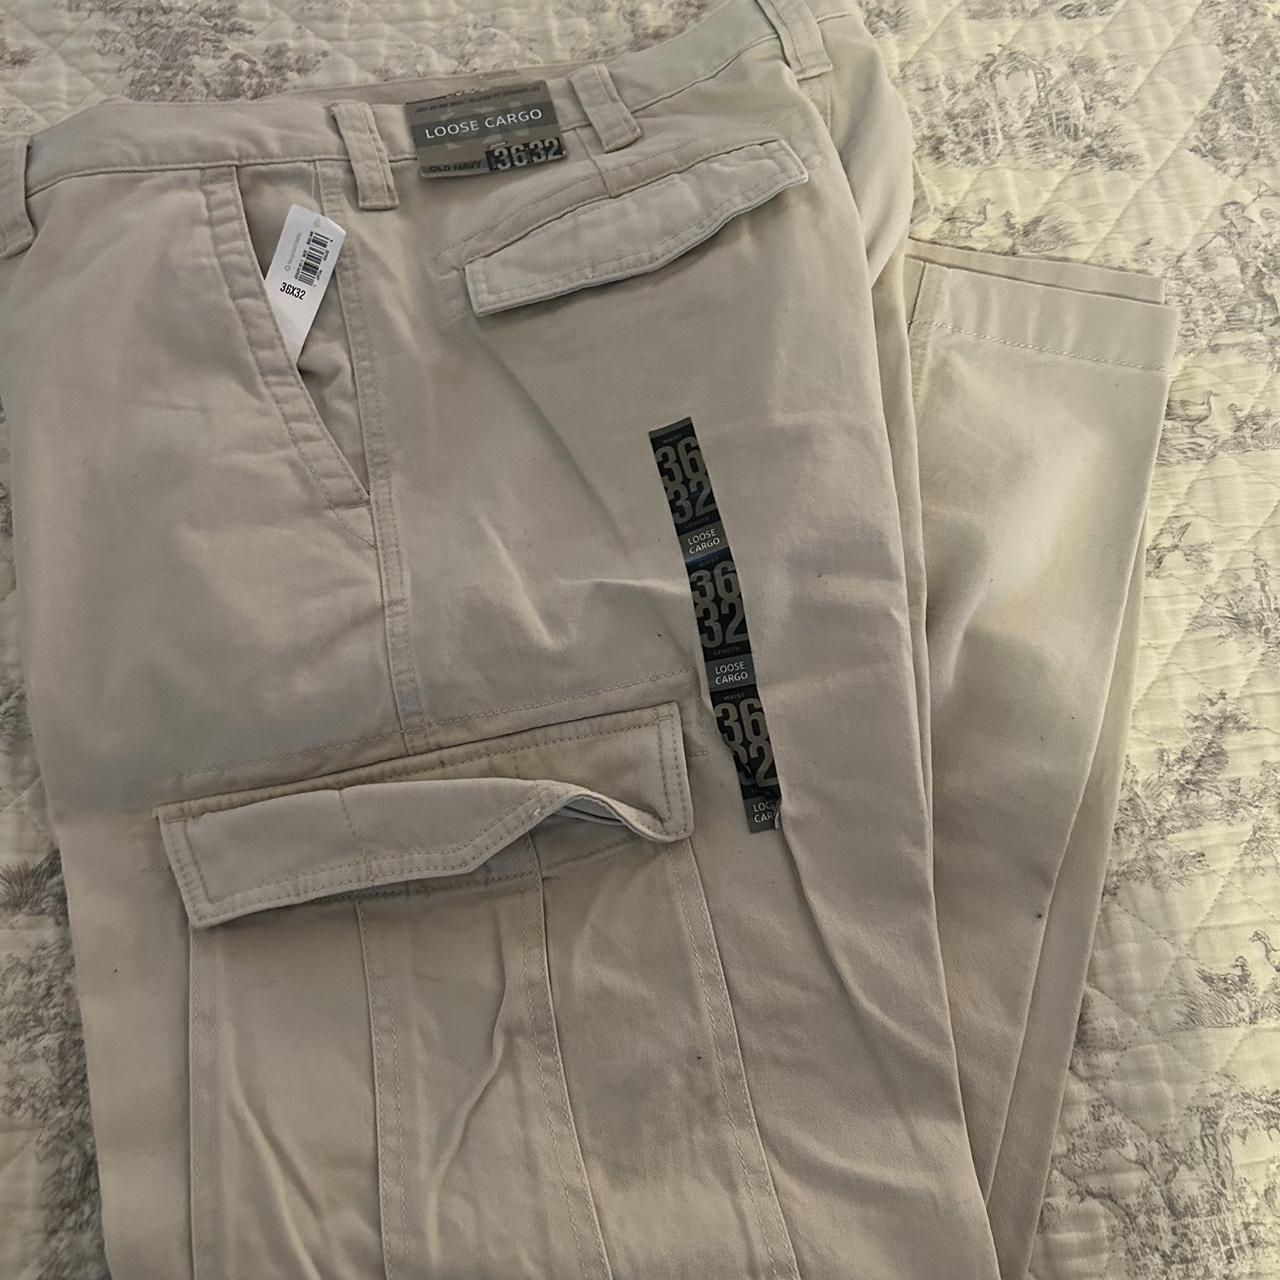 Twill Cargos for Men | Old Navy | Old navy cargo pants, Pants outfit men,  Mens outfits